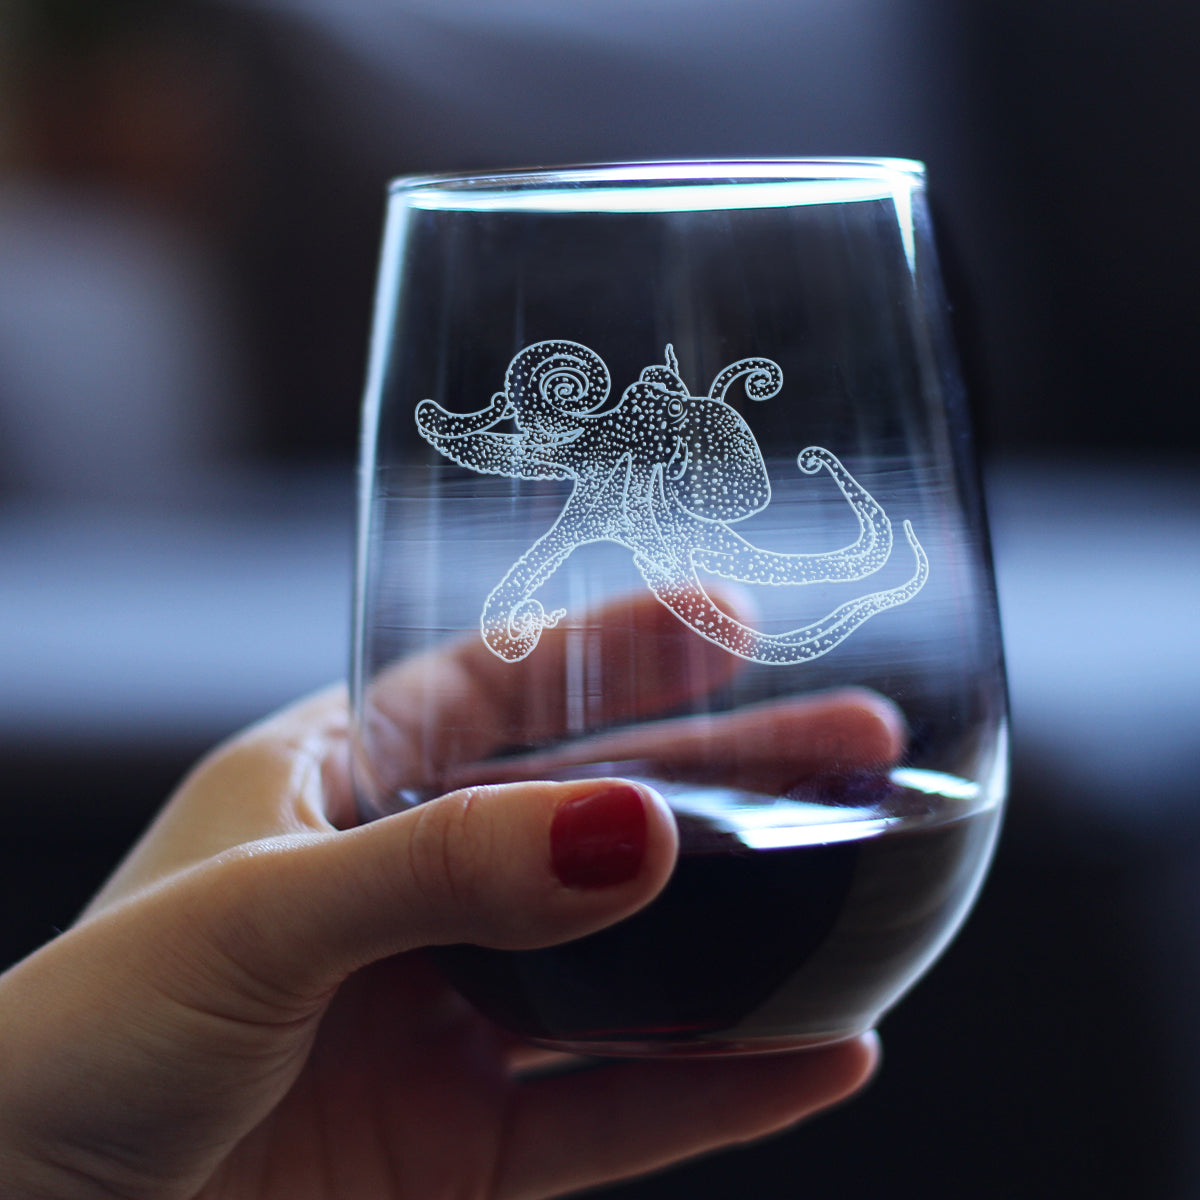 Octopus Engraved Stemless Wine Glass, Unique Decorative Gifts for Beach House, Cute Birthday Gift for Women Who Love Octopuses